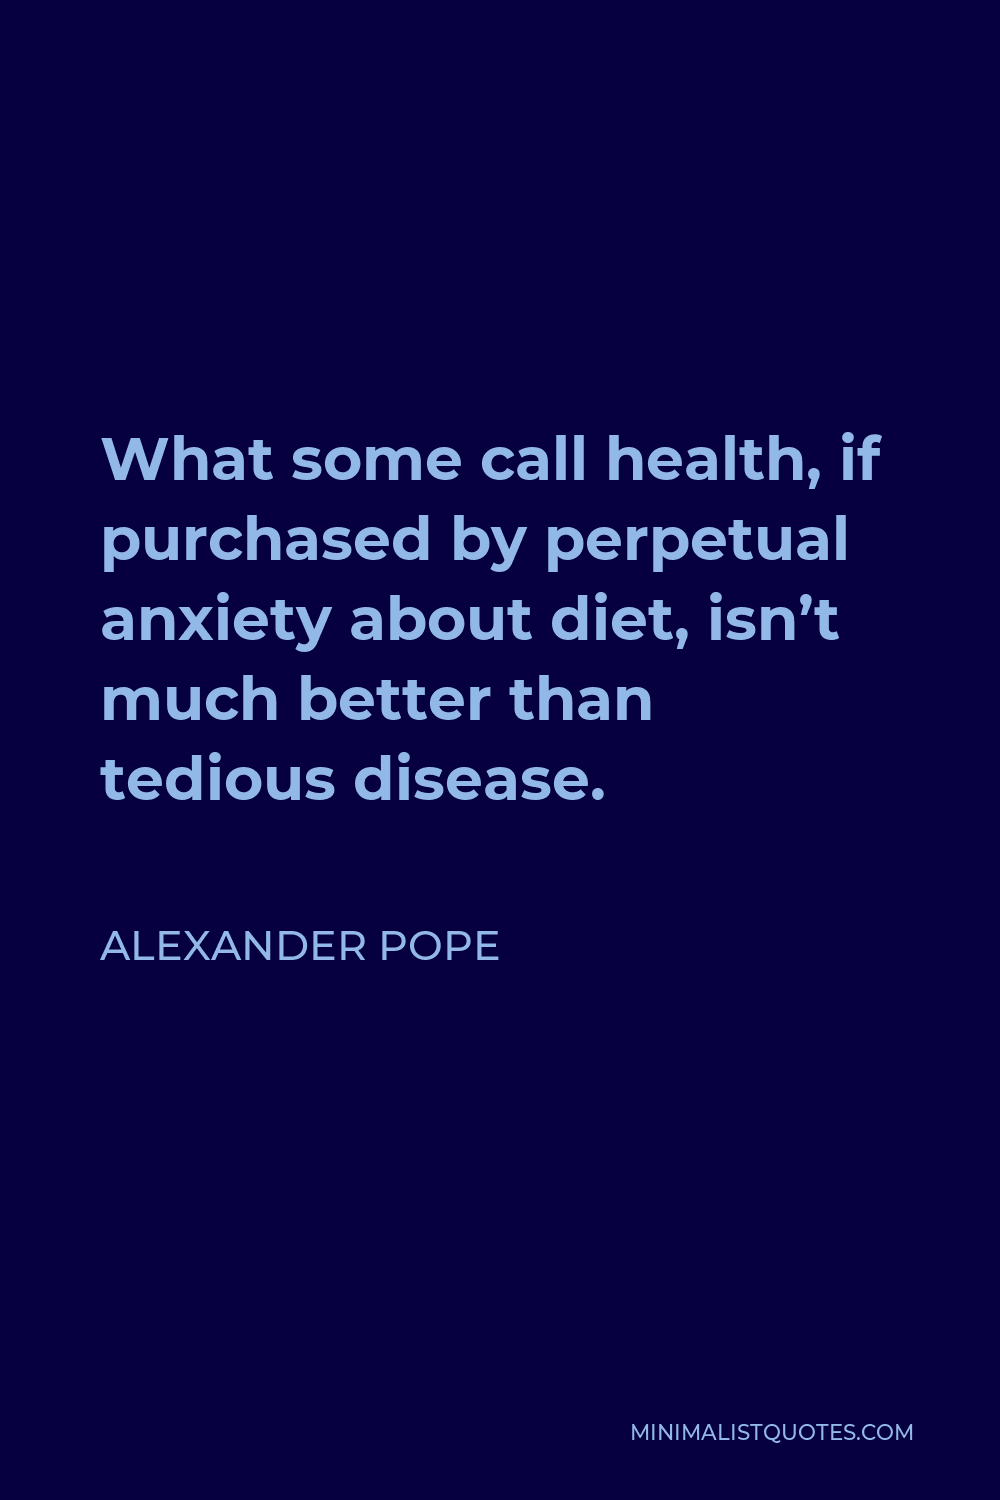 Alexander Pope Quote - What some call health, if purchased by perpetual anxiety about diet, isn’t much better than tedious disease.